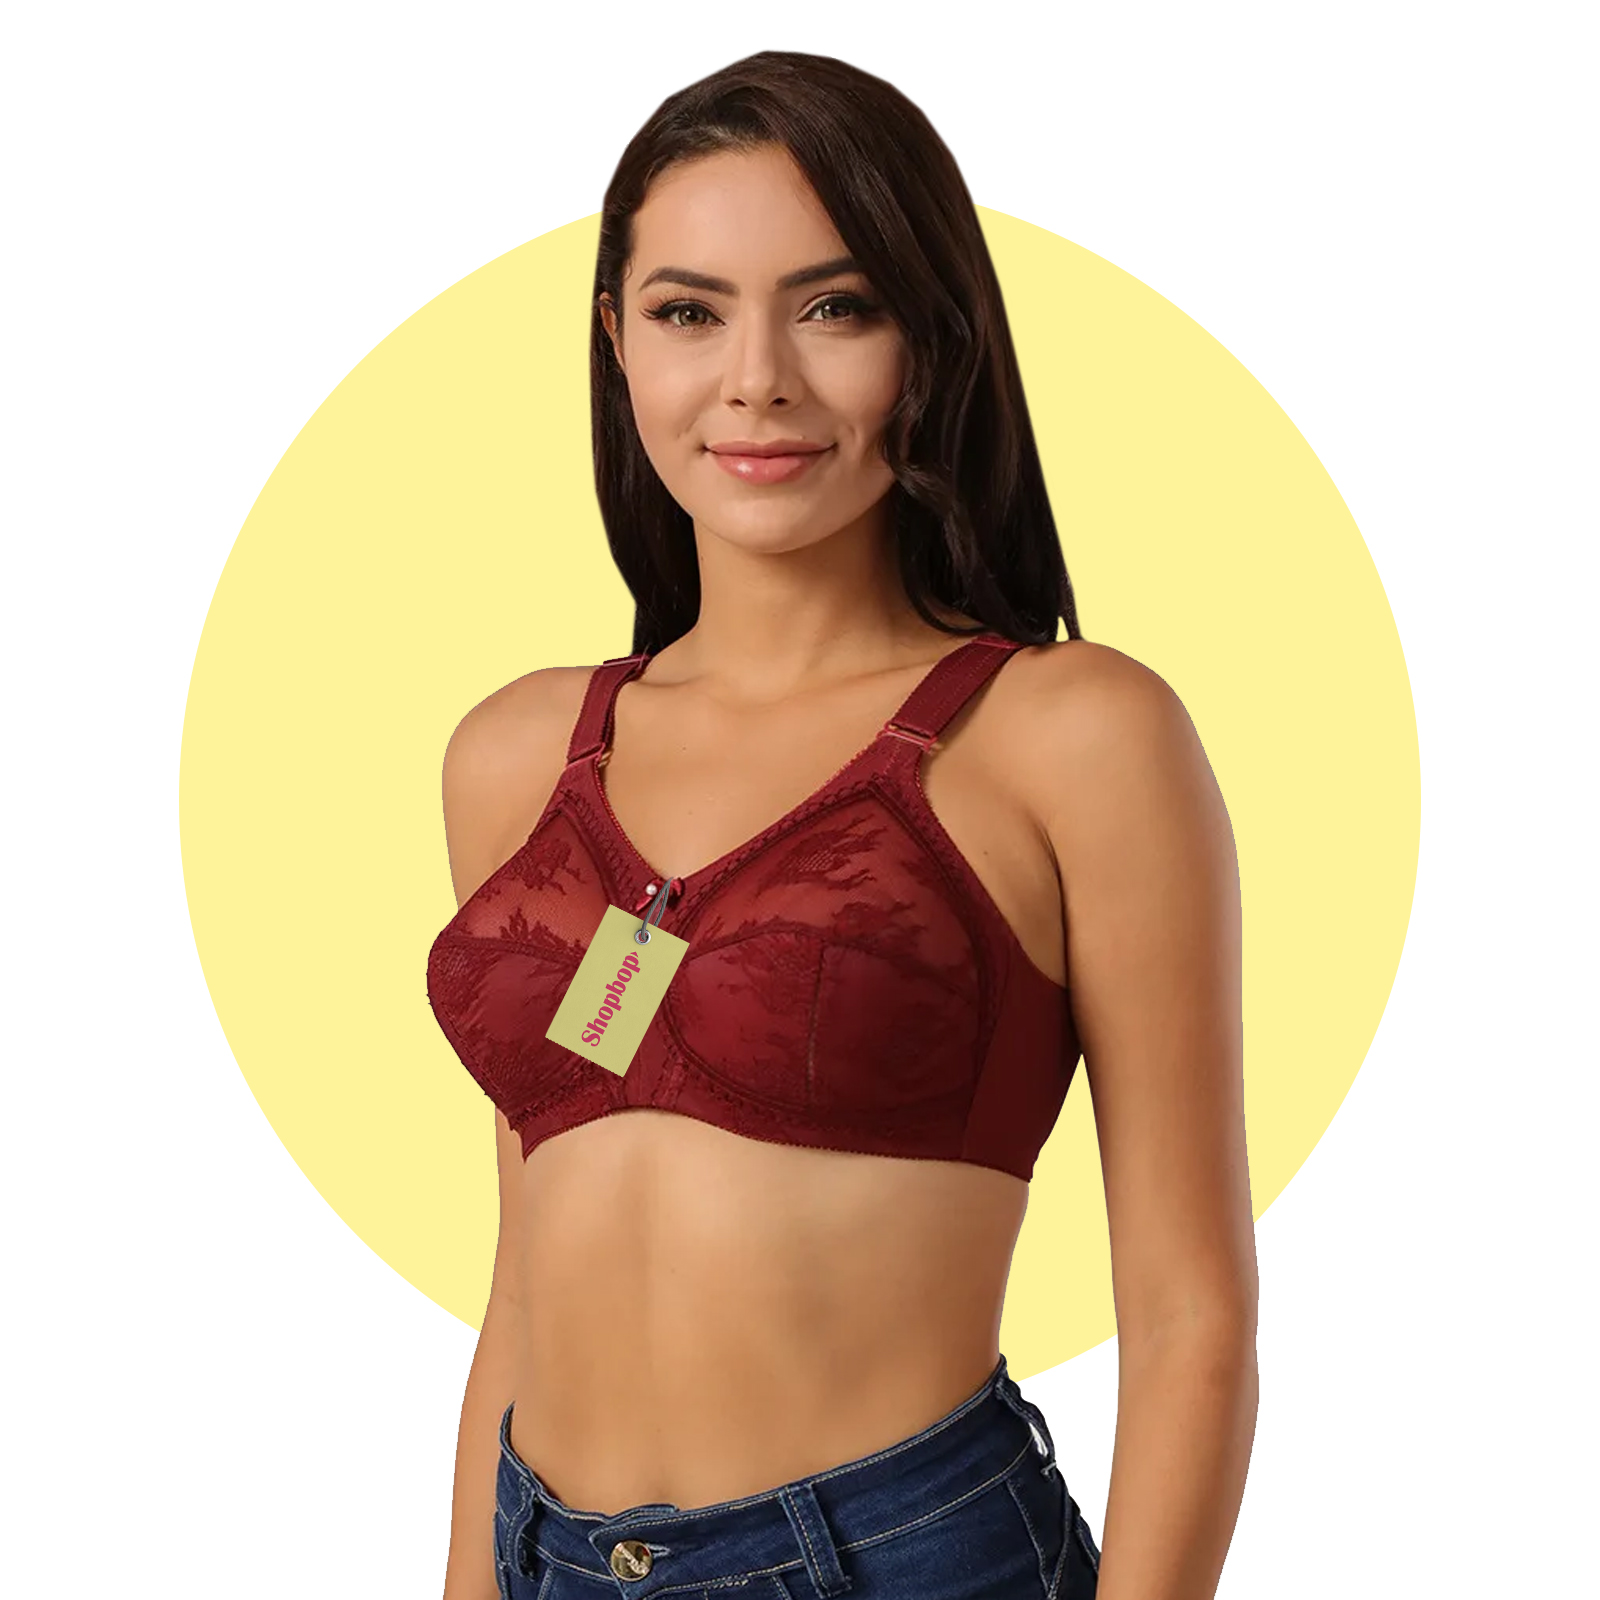 Jacqueline Bra Non Wired Support Bra Women Full Coverage Cup Maroon